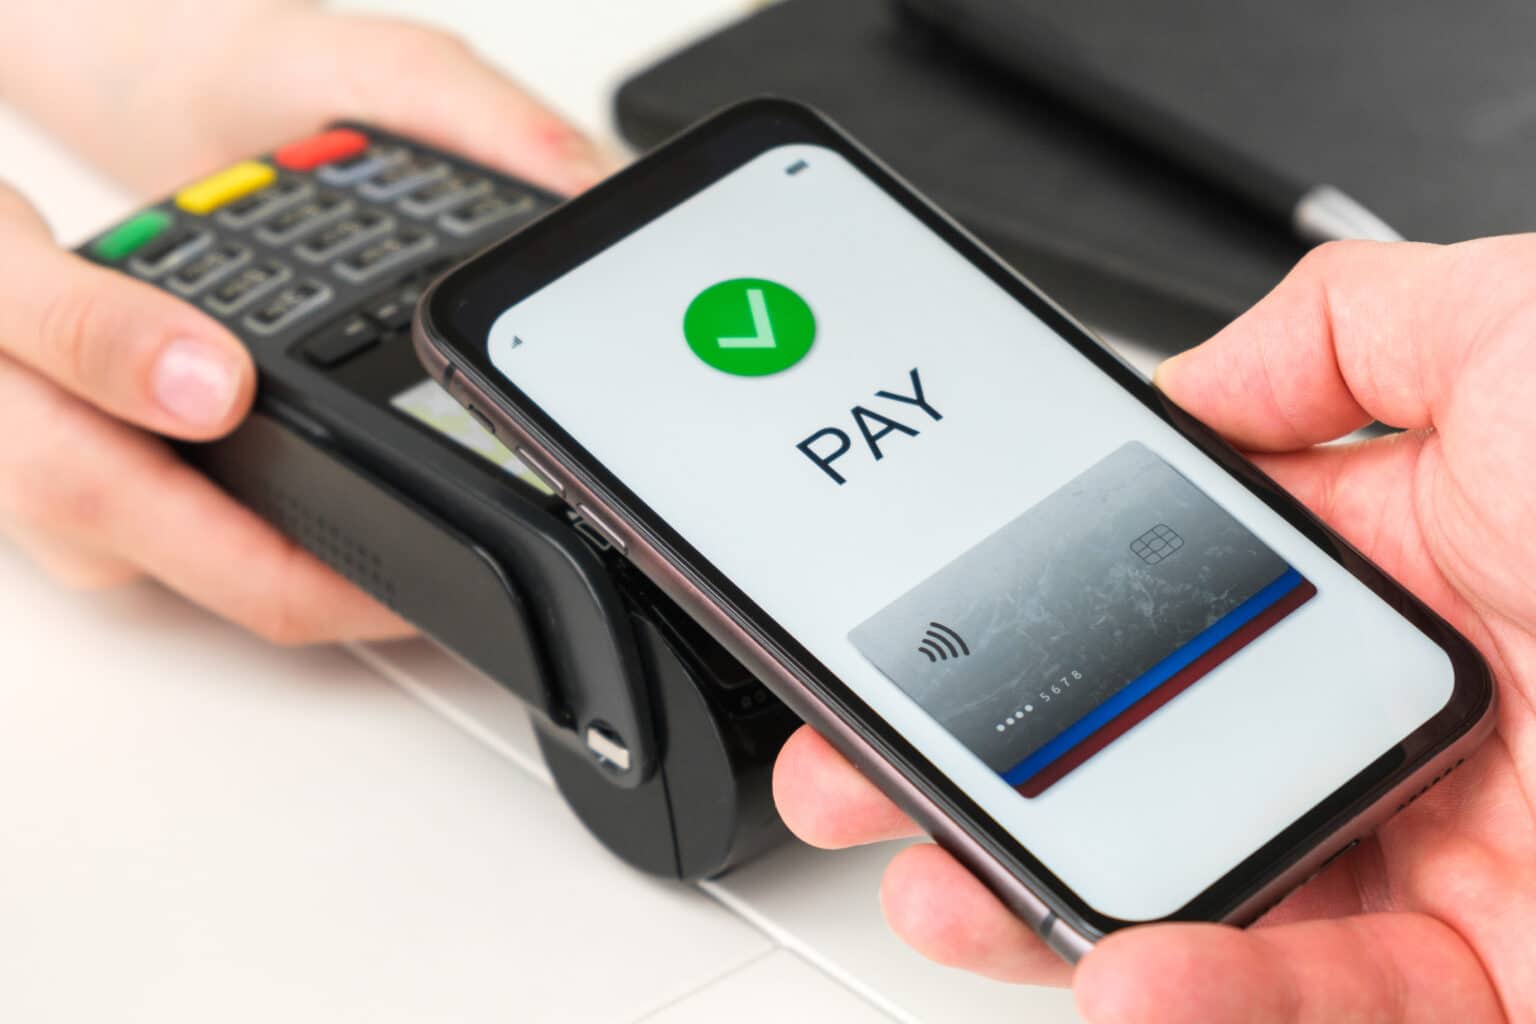 contactless payment using smartphone by pos paymen 2021 09 27 19 03 19 utc